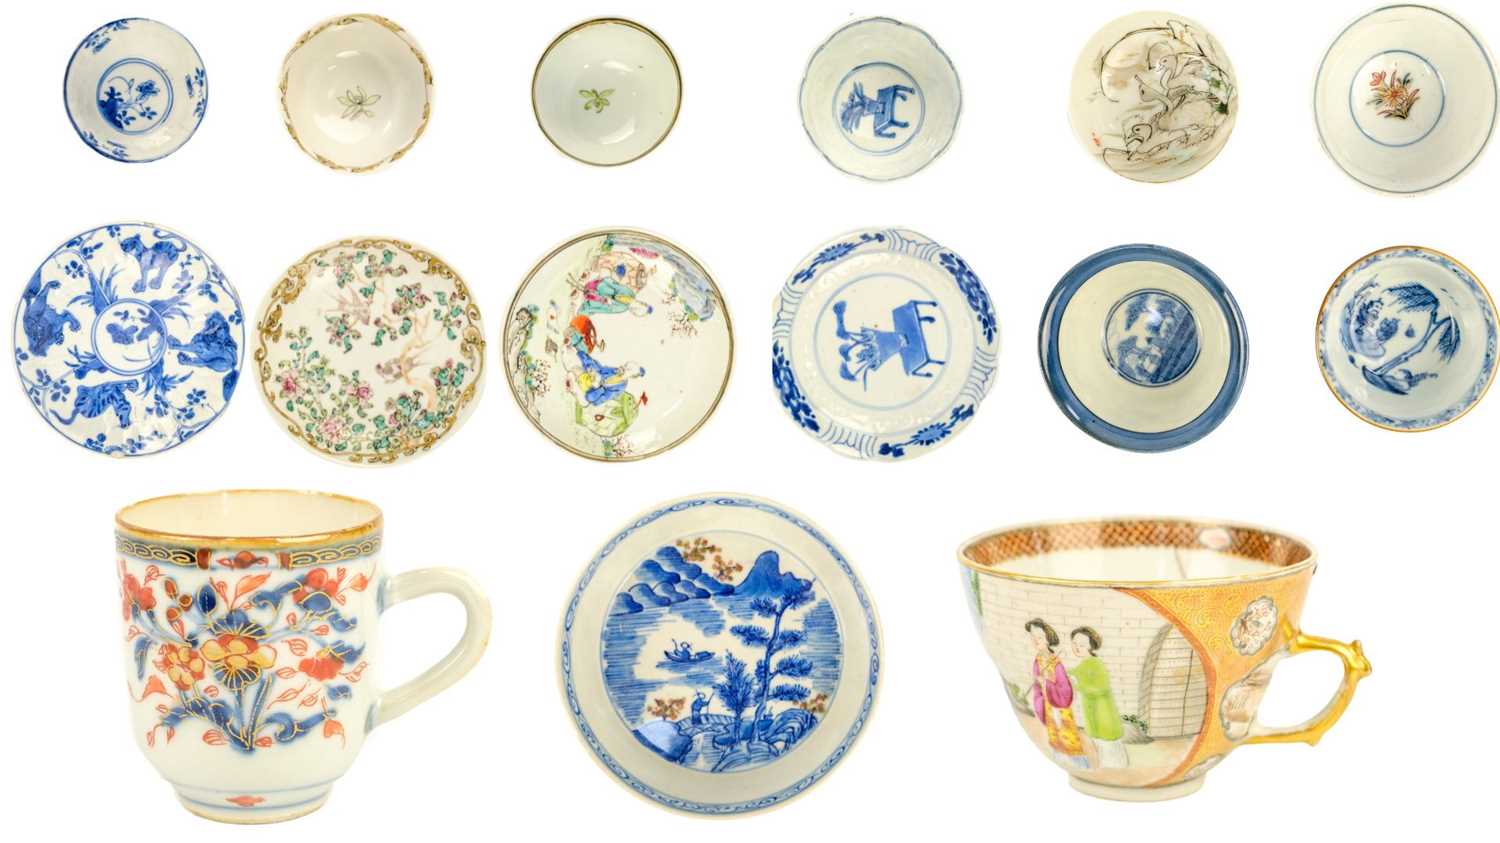 Five Chinese porcelain tea bowls and saucers, 18th century.